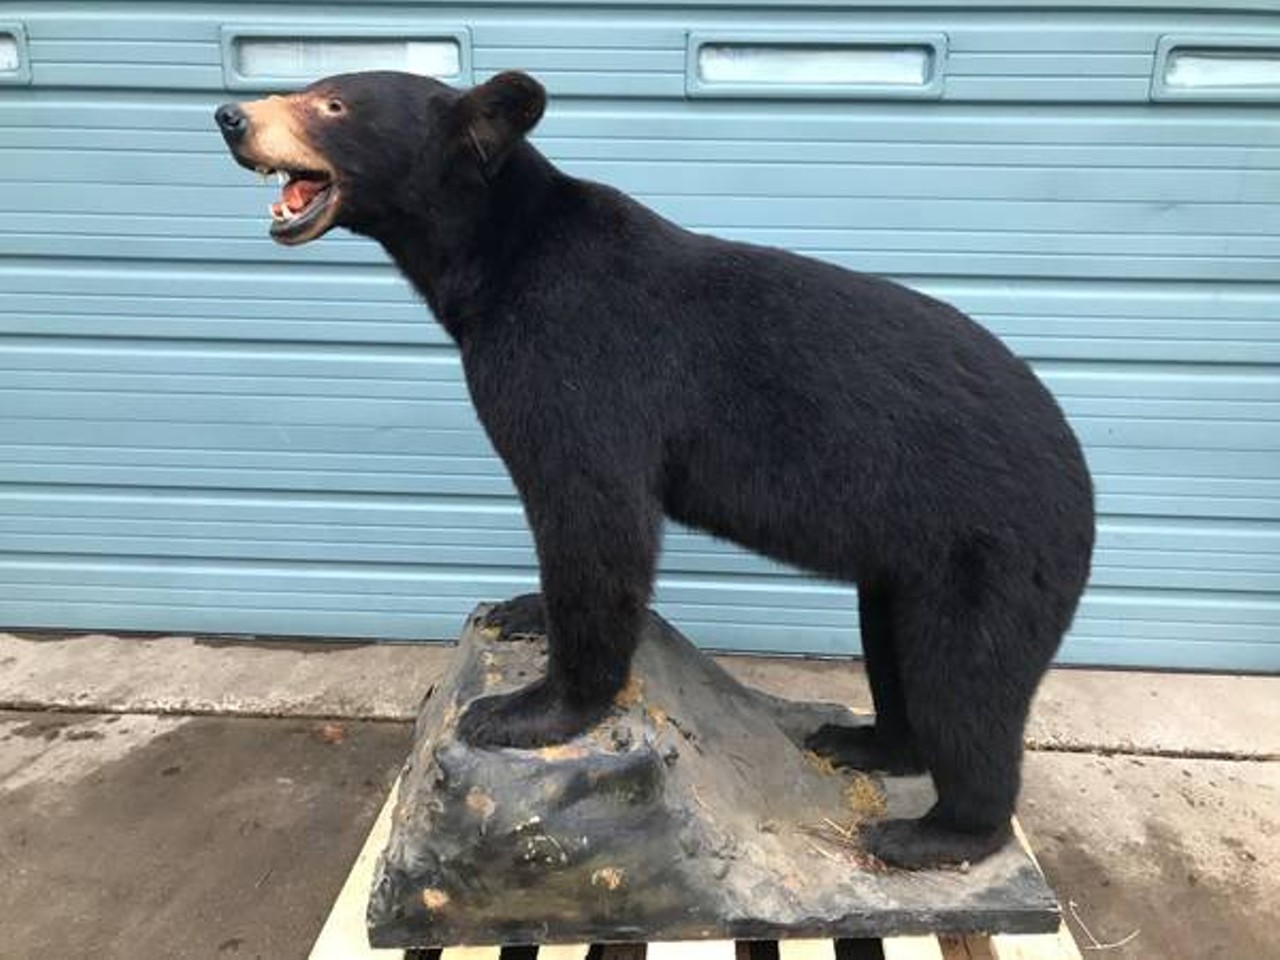 Full Mount Michigan Black Bear ($750)
Imagine being a burglar and seeing this in the middle of your break-in.
Photo via  Ryan / Craigslist